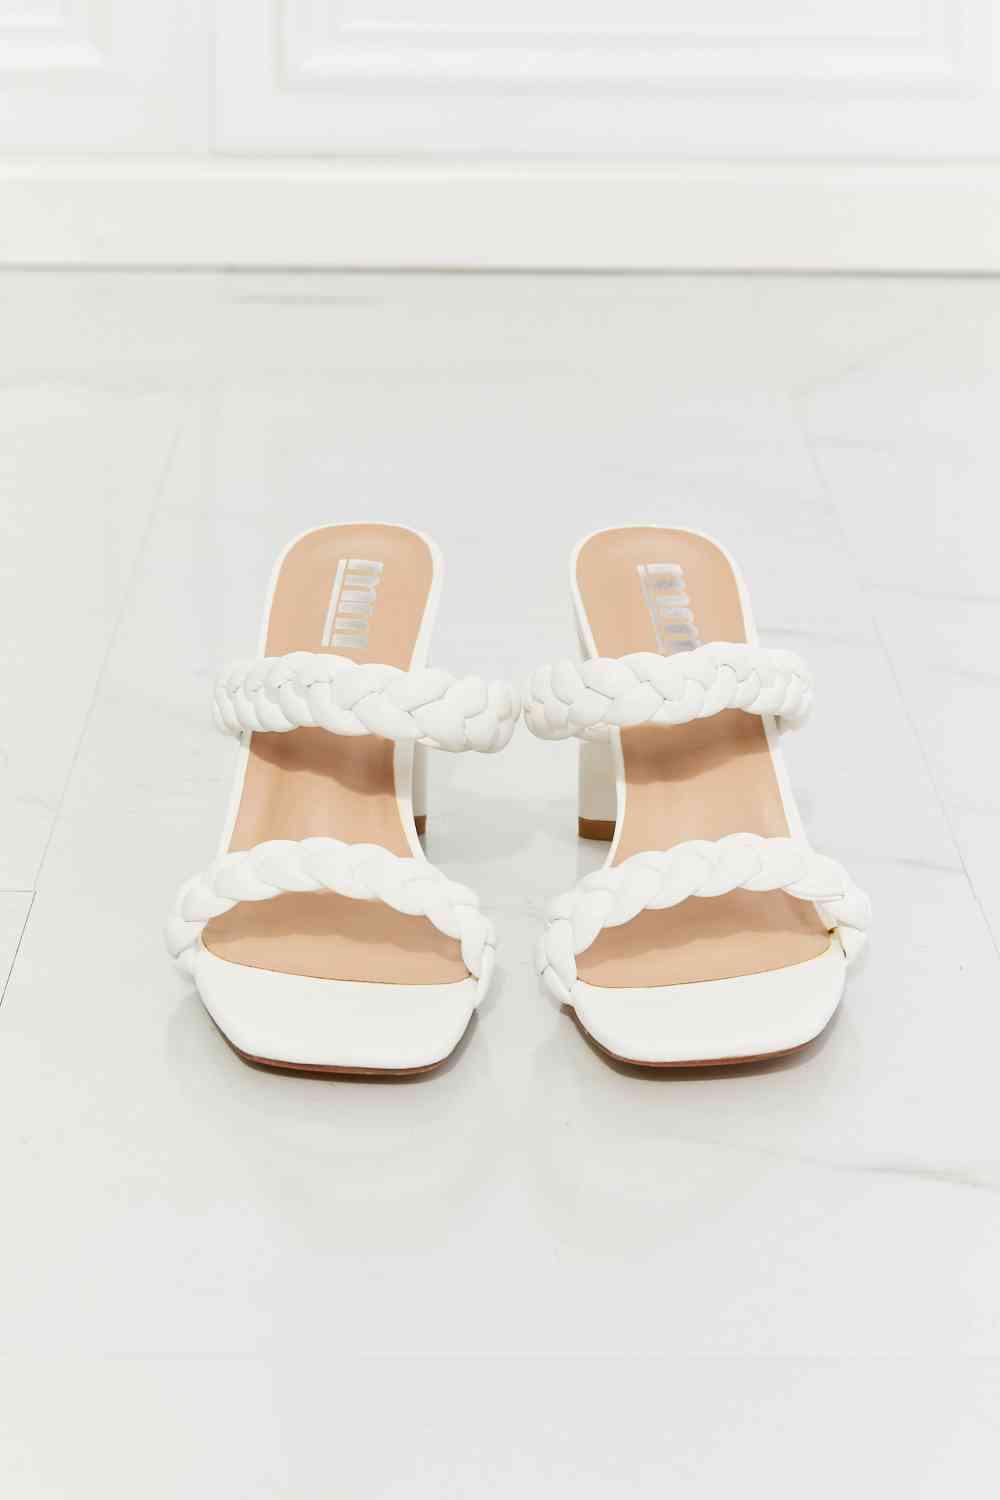 MMShoes In Love Double Braided Block Heel Sandal in White - Closet of Ren